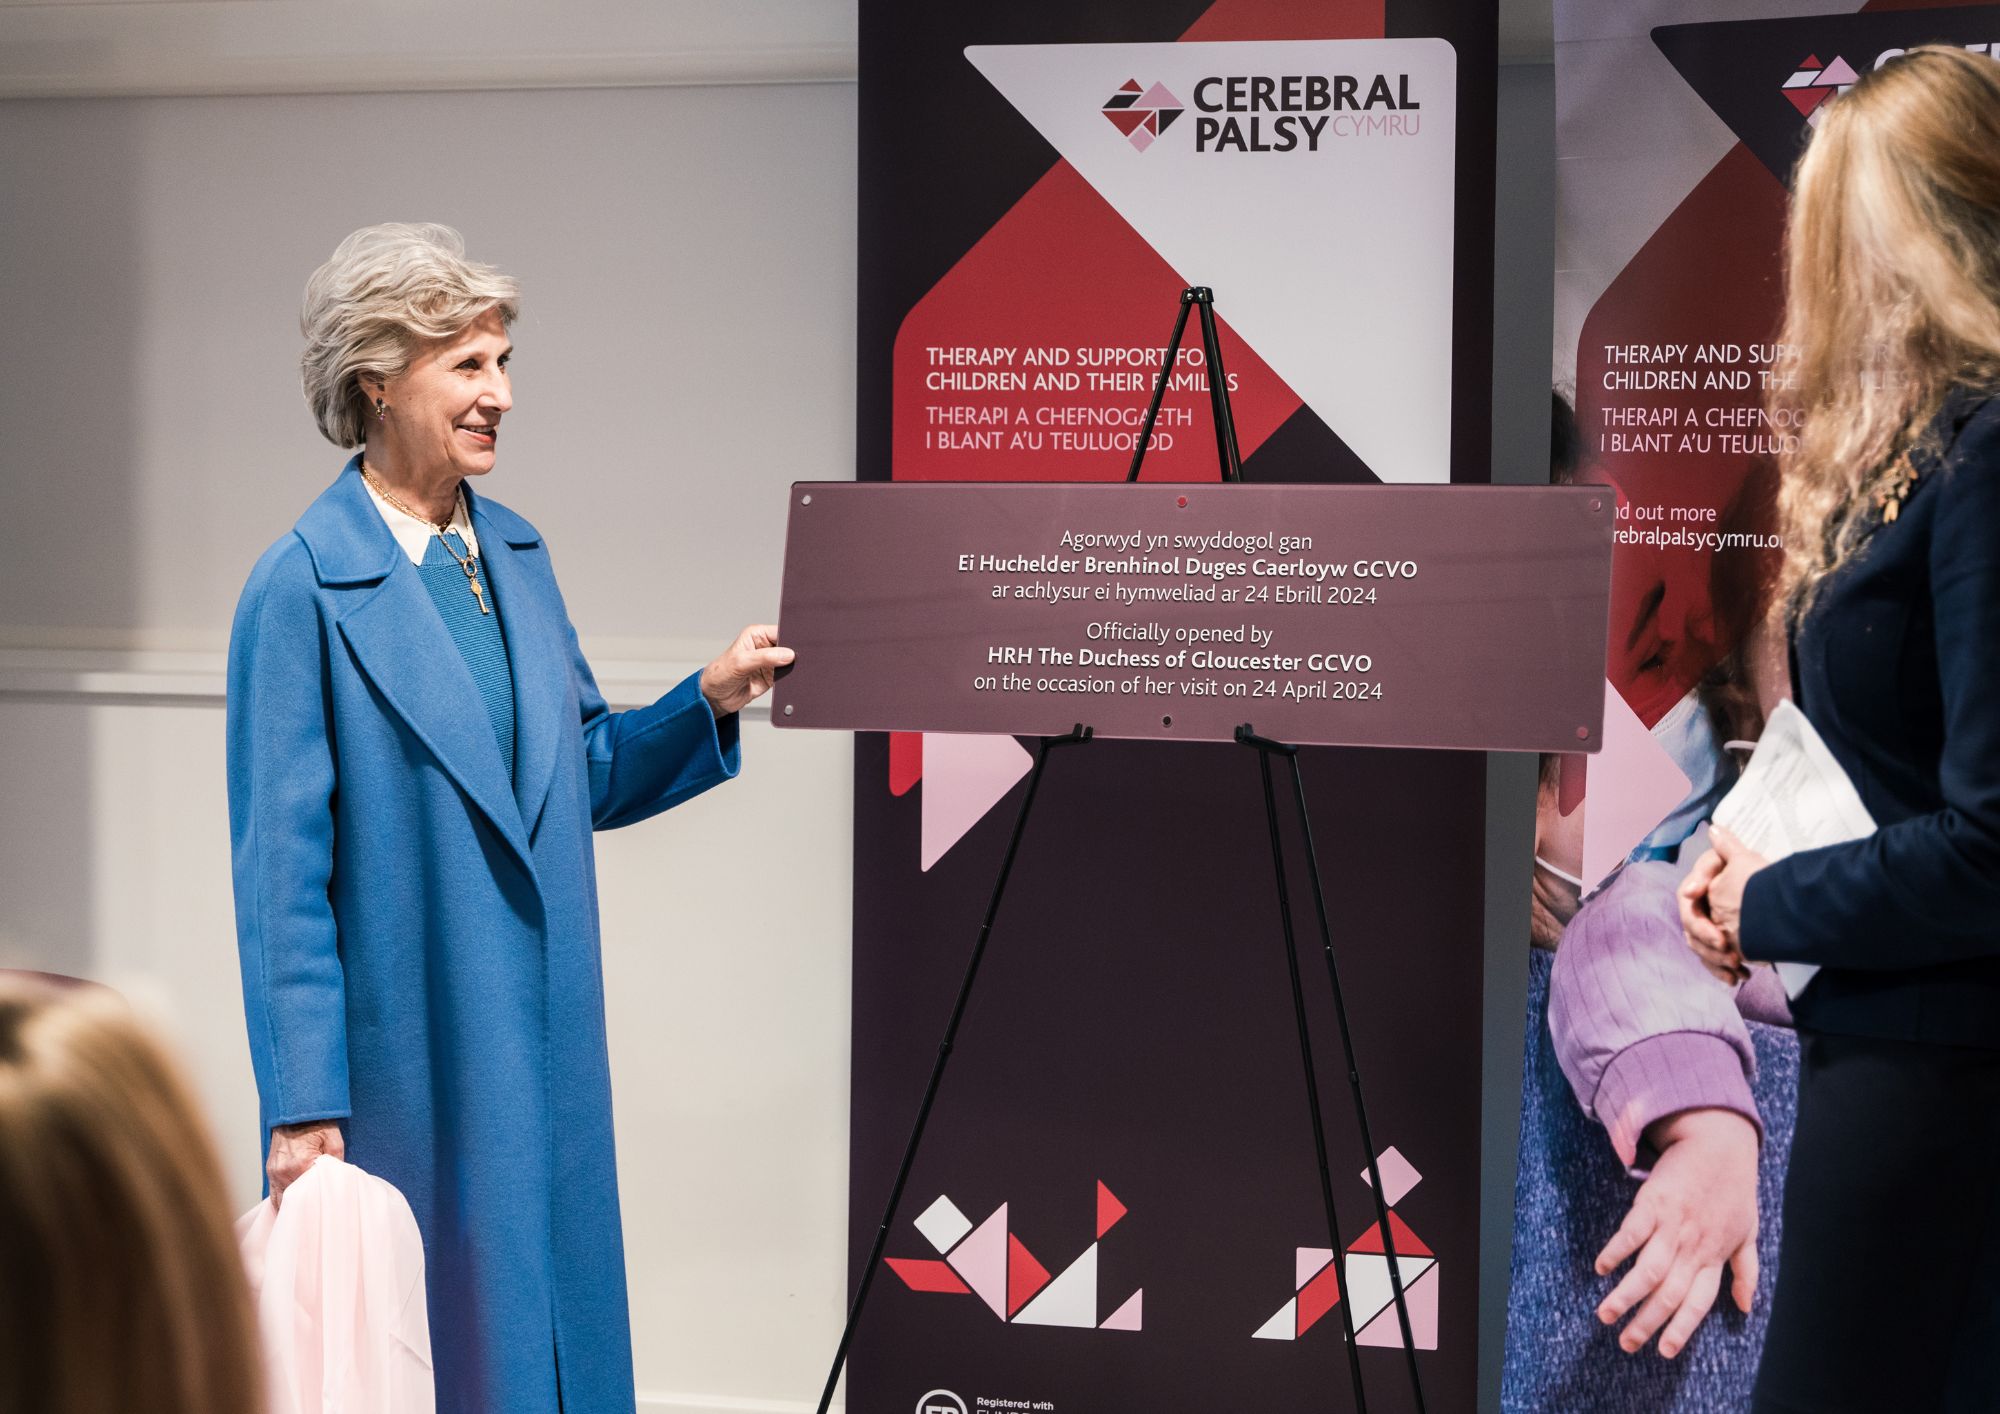 The Duchess of Gloucester stood next to the official opening plaque